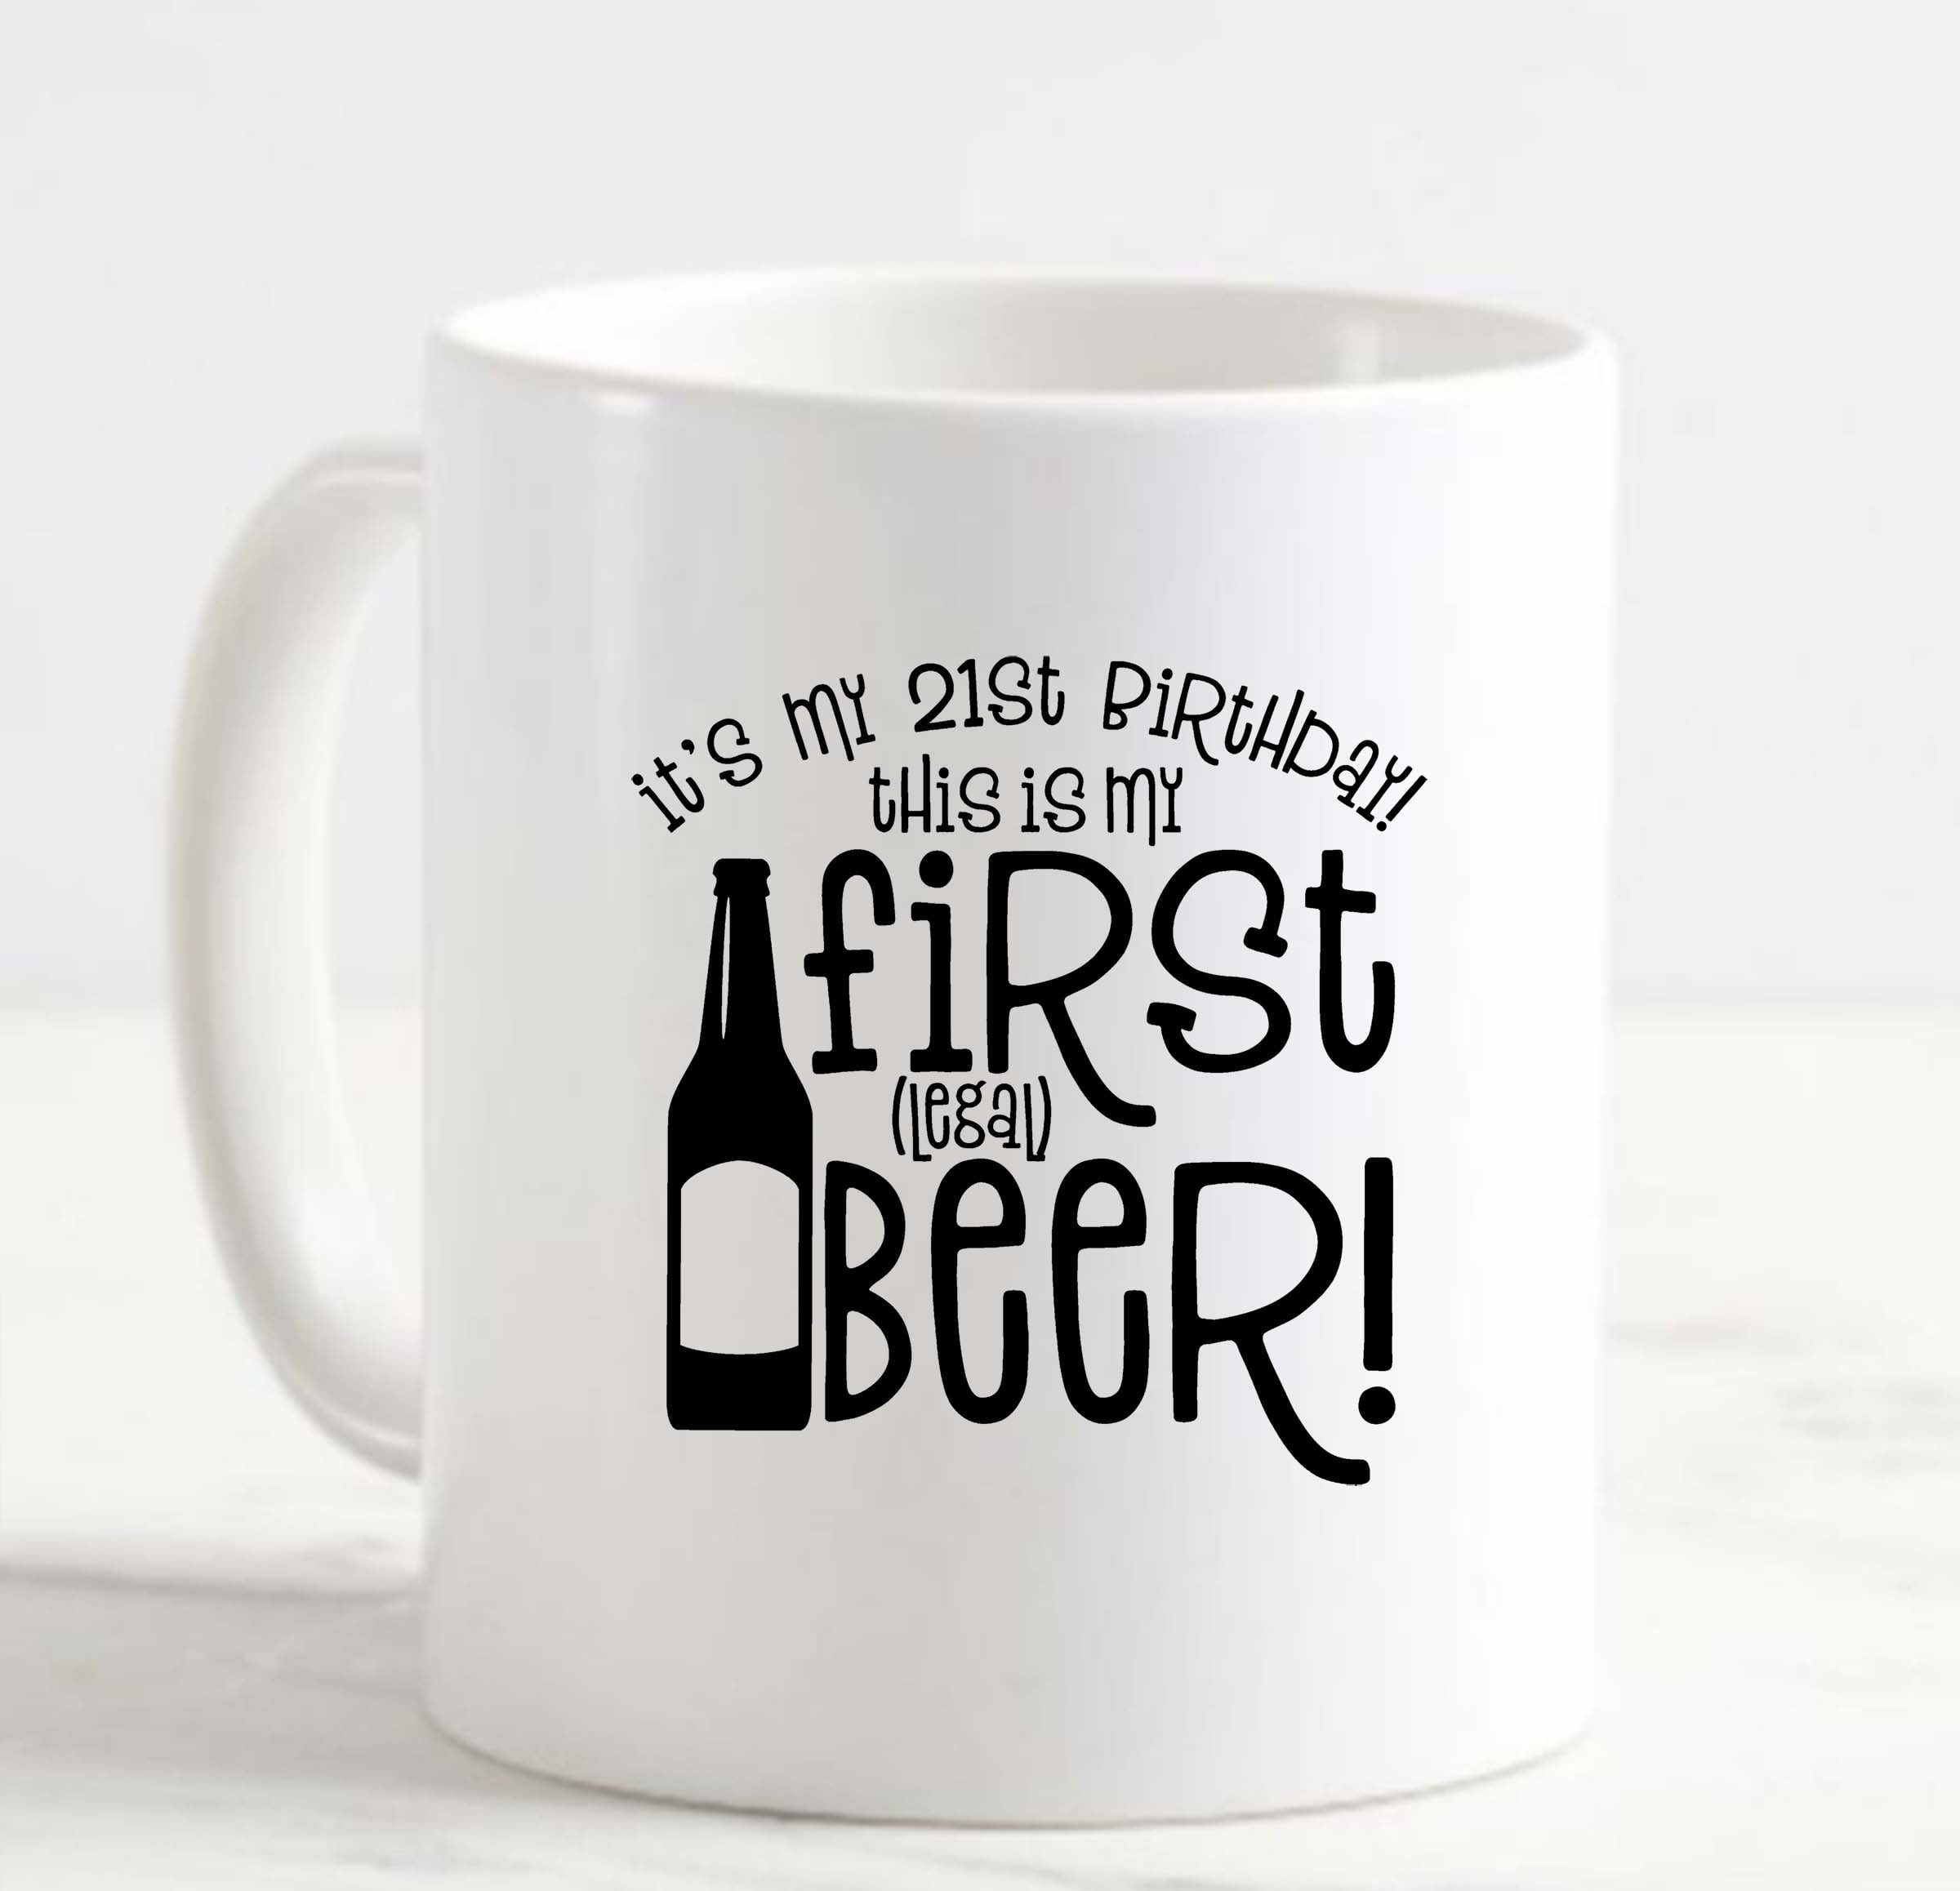 Coffee Mug Its My 21St Birthday This Is My First (Legal) Beer! Bottle Funny  White Cup Funny Gifts for work office him her 